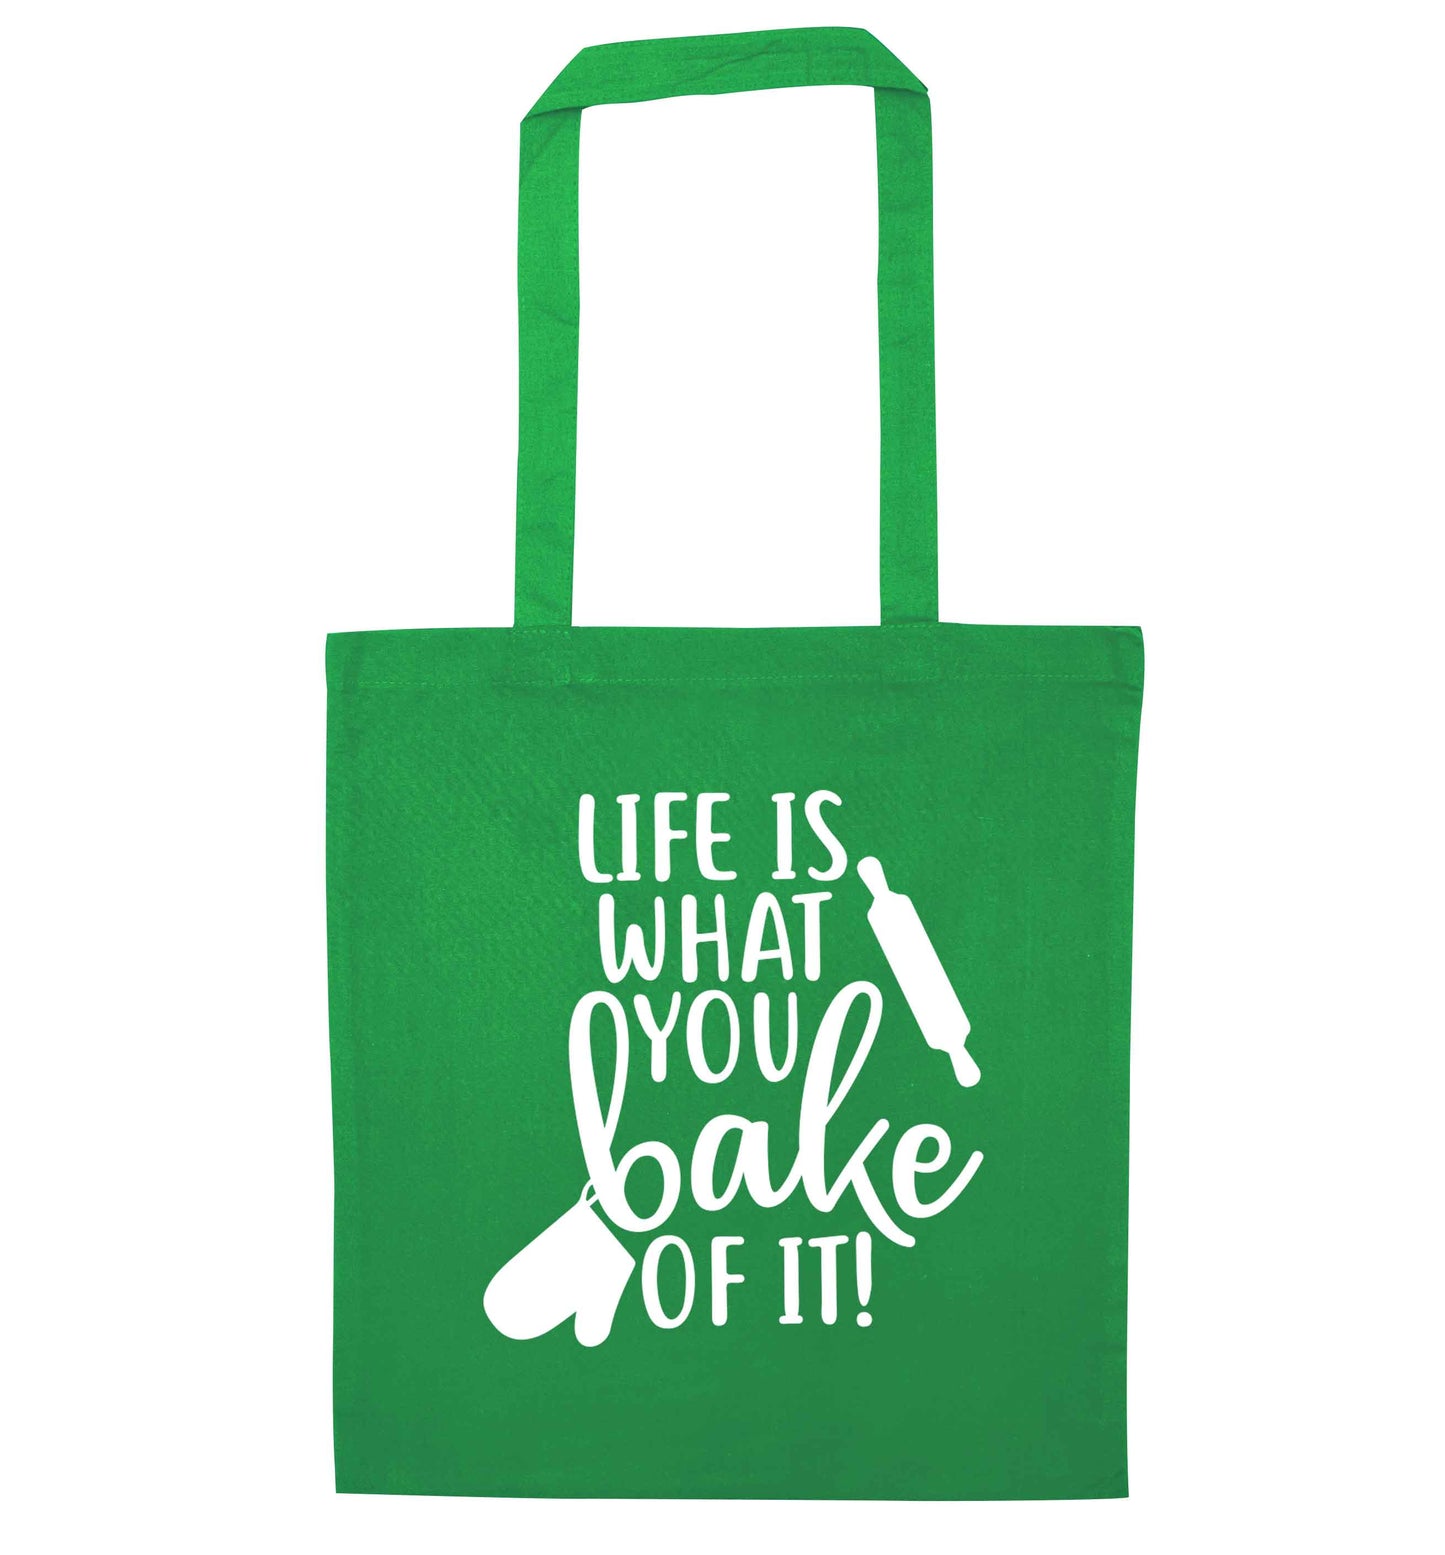 Life is what you bake of it green tote bag